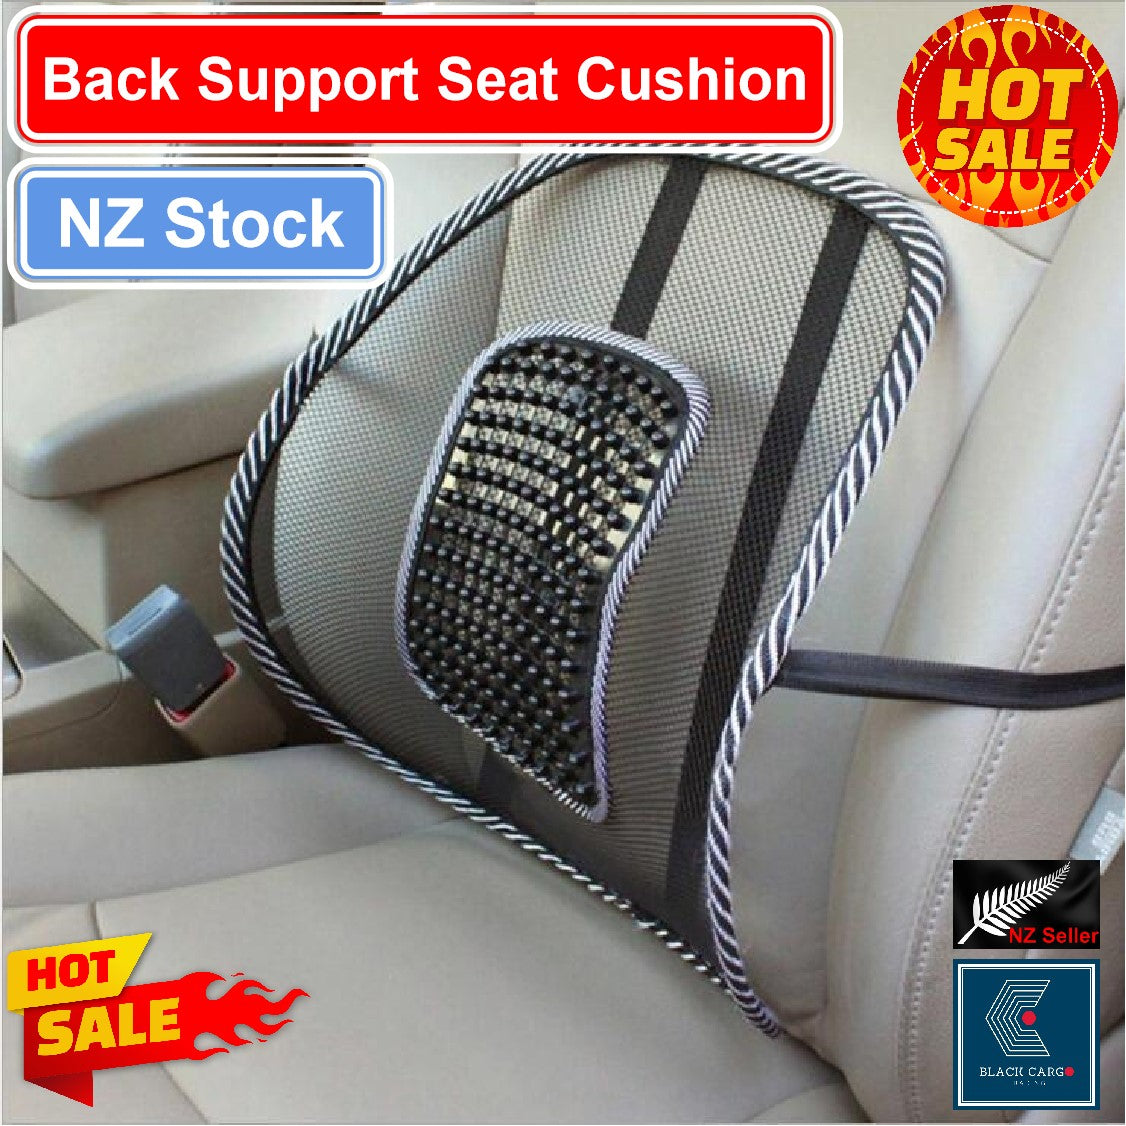 Back Support Seat Cushion with Breathable Massage - Referdeal